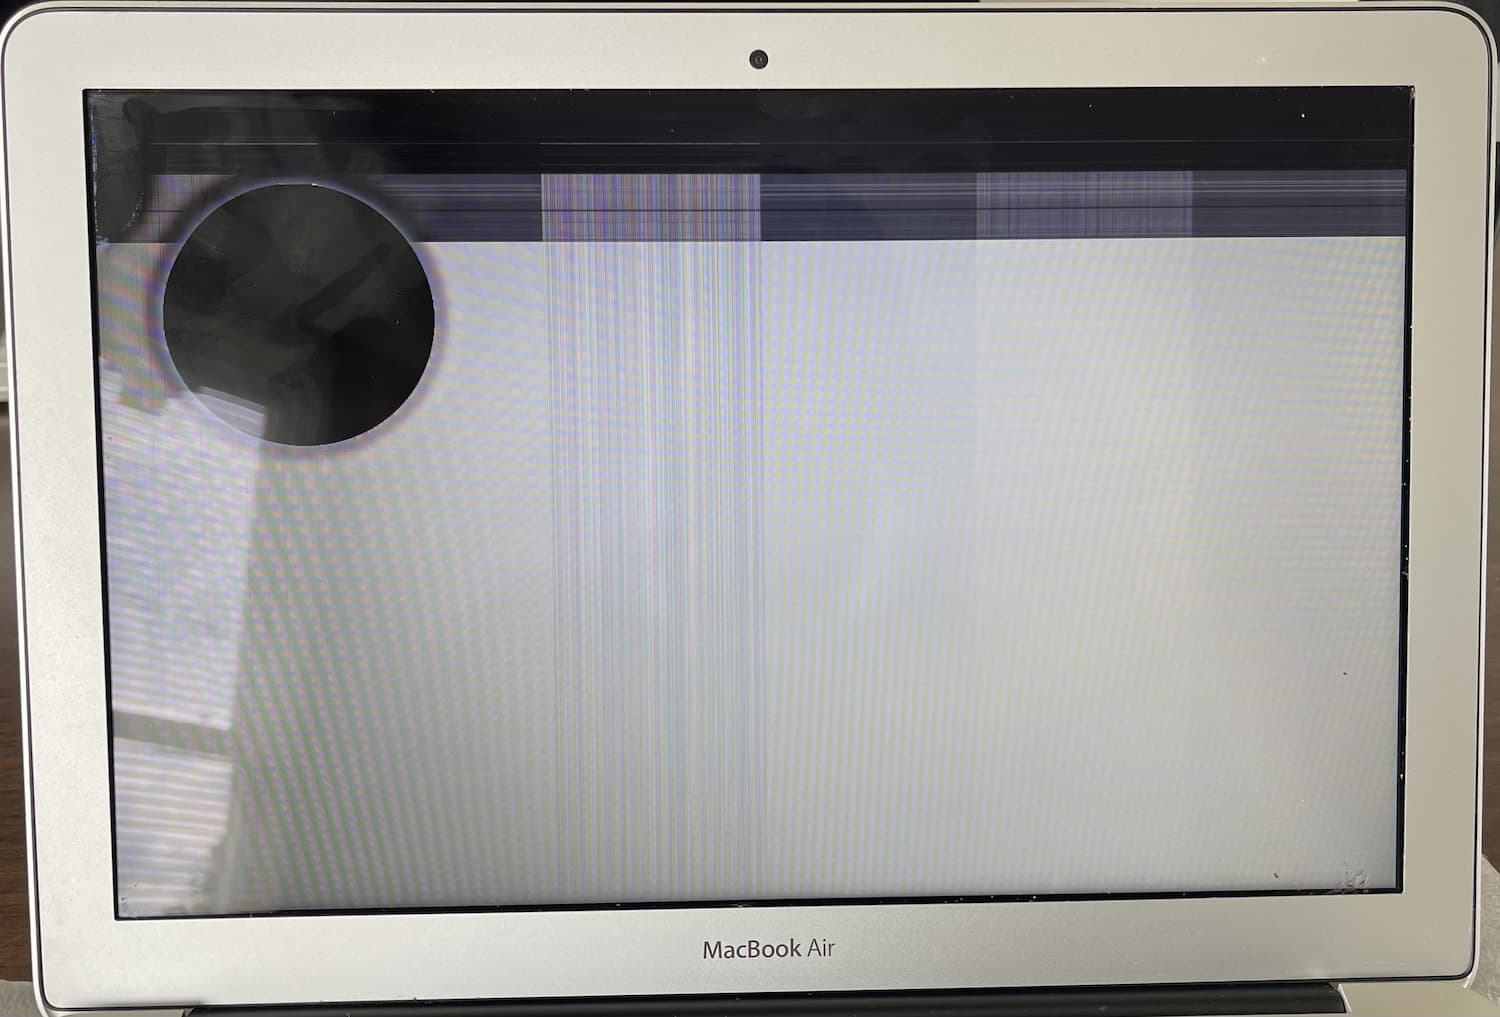 2015 MacBook Air With Black Circle On Screen